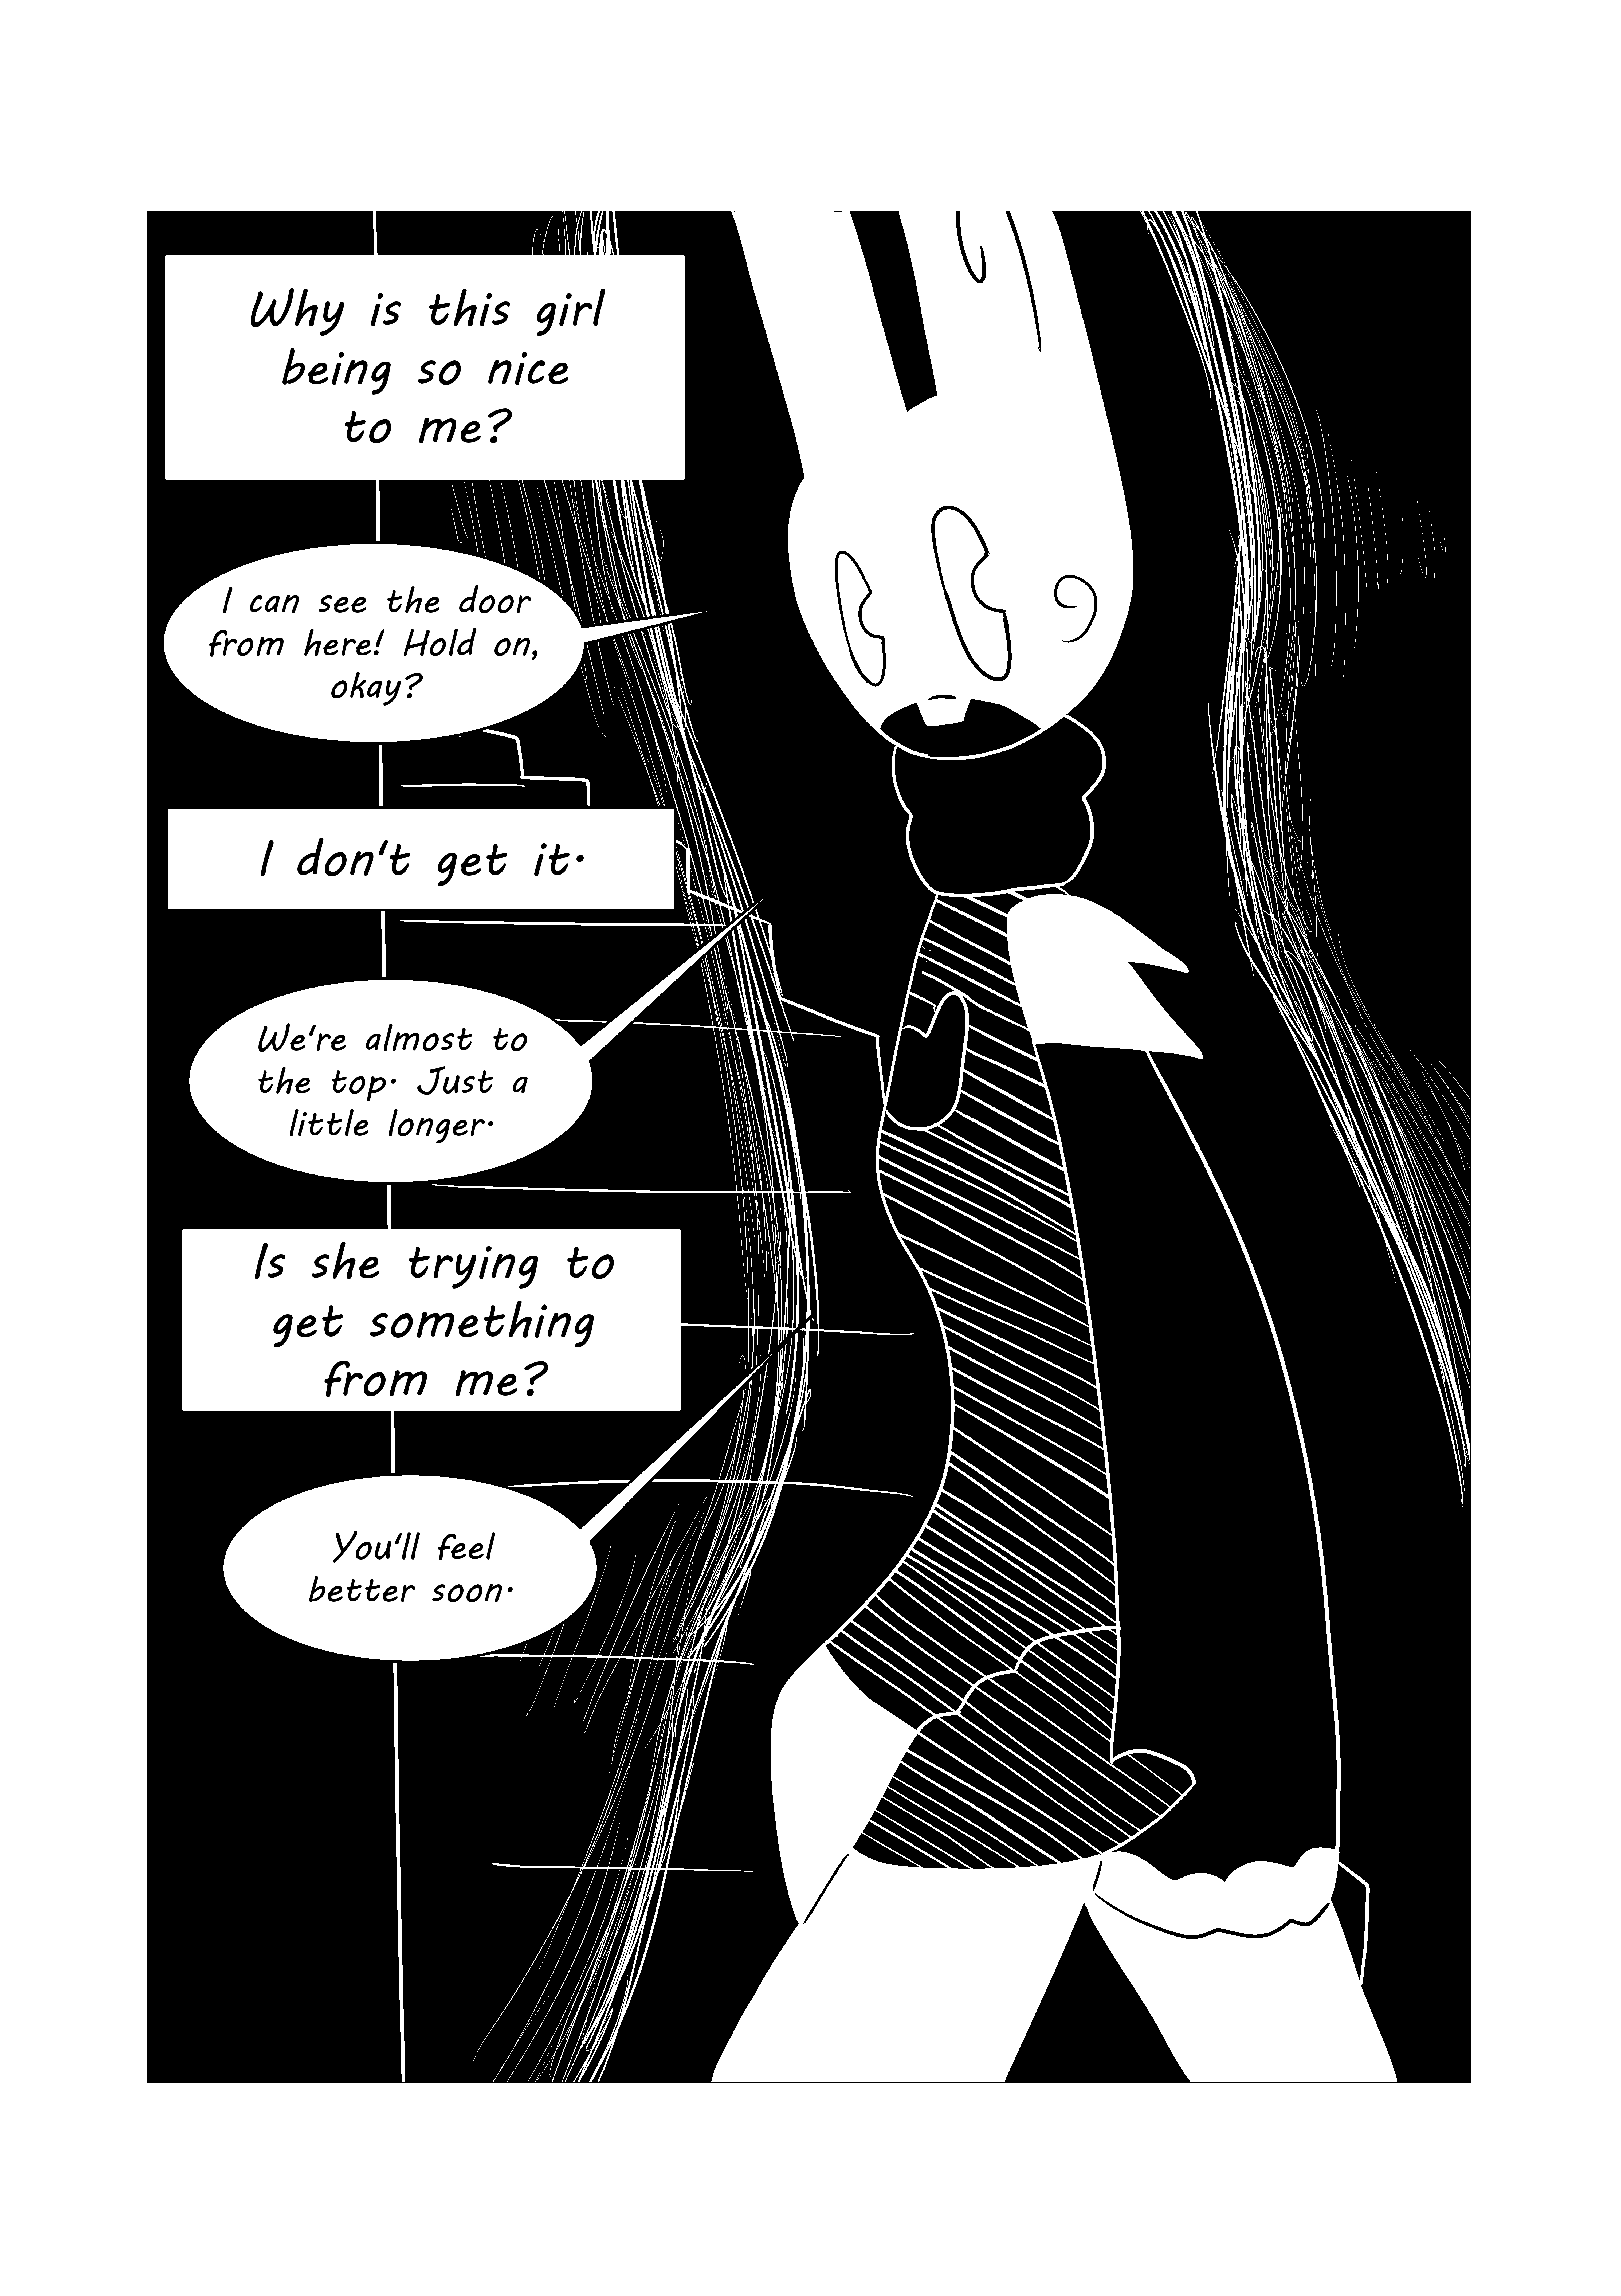 Page 67 : I don't get it